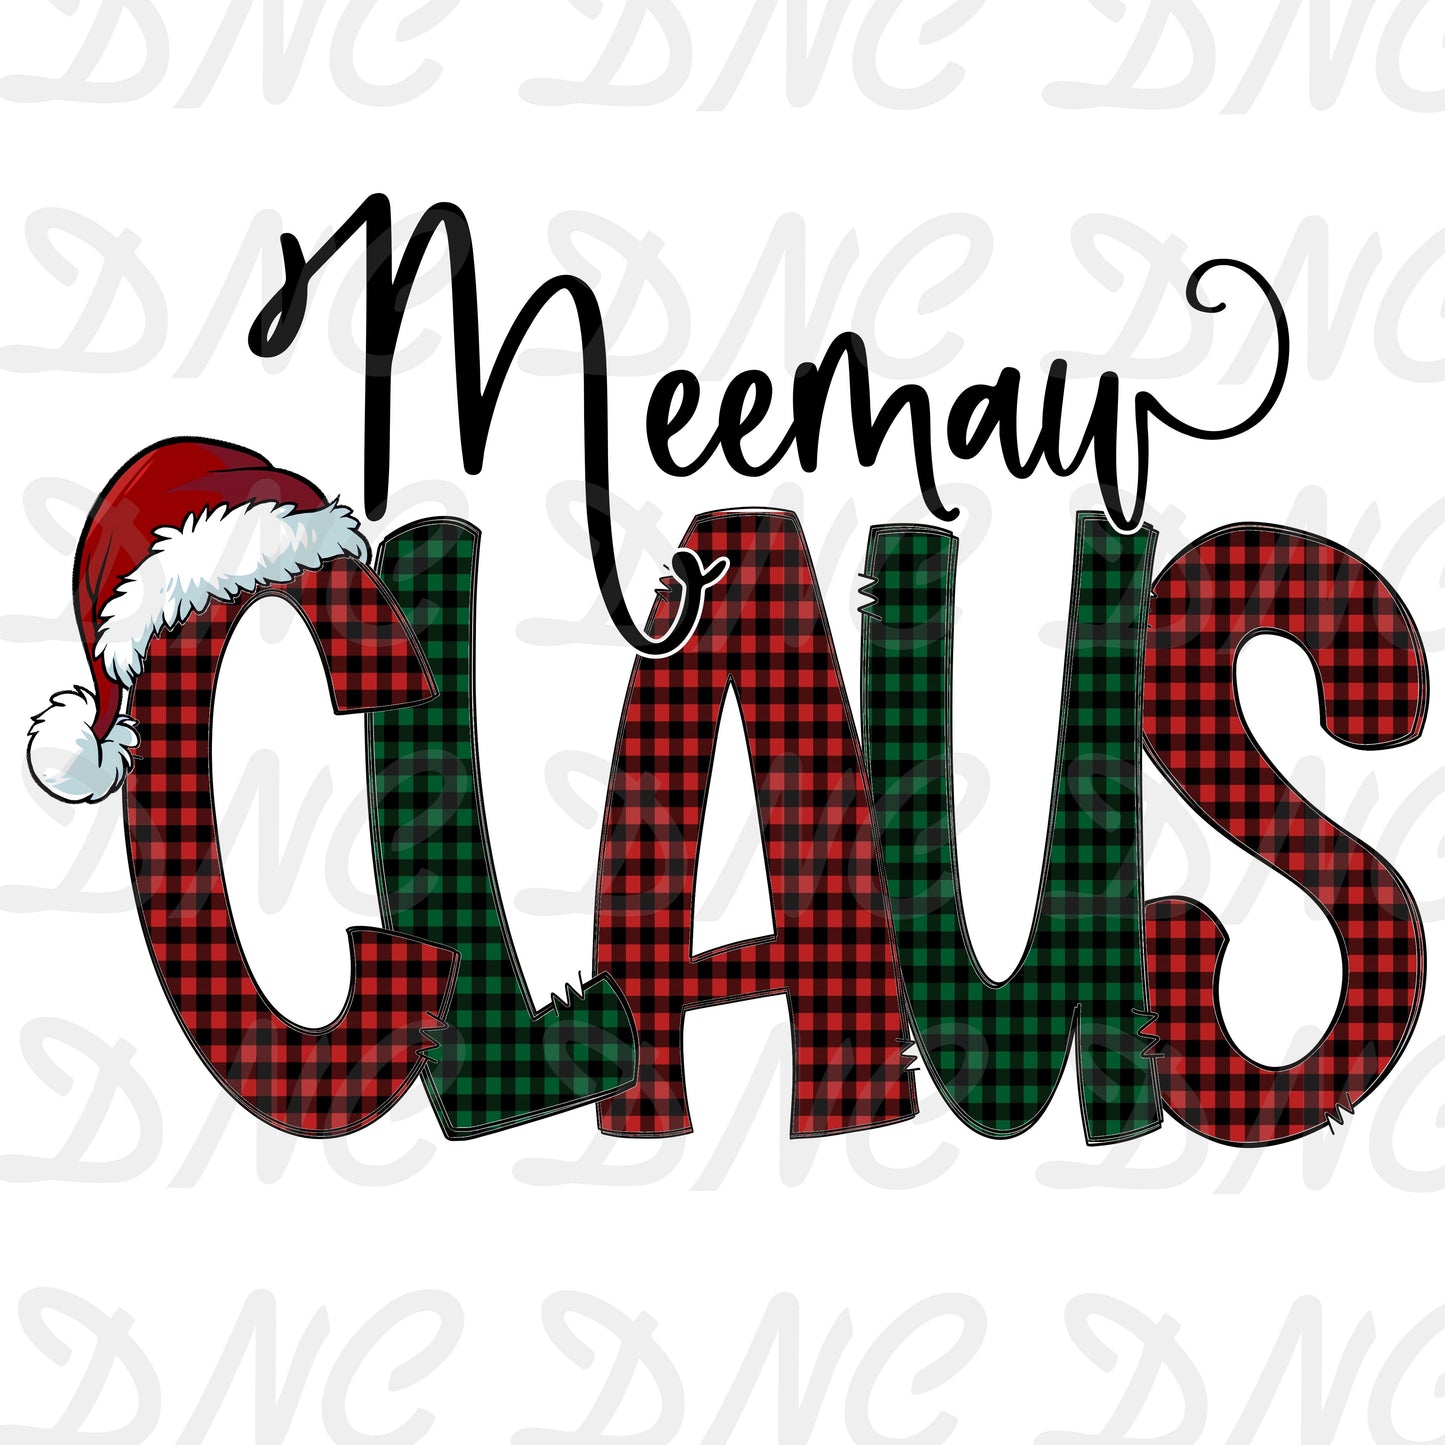 Meemaw claus red and green - Sublimation